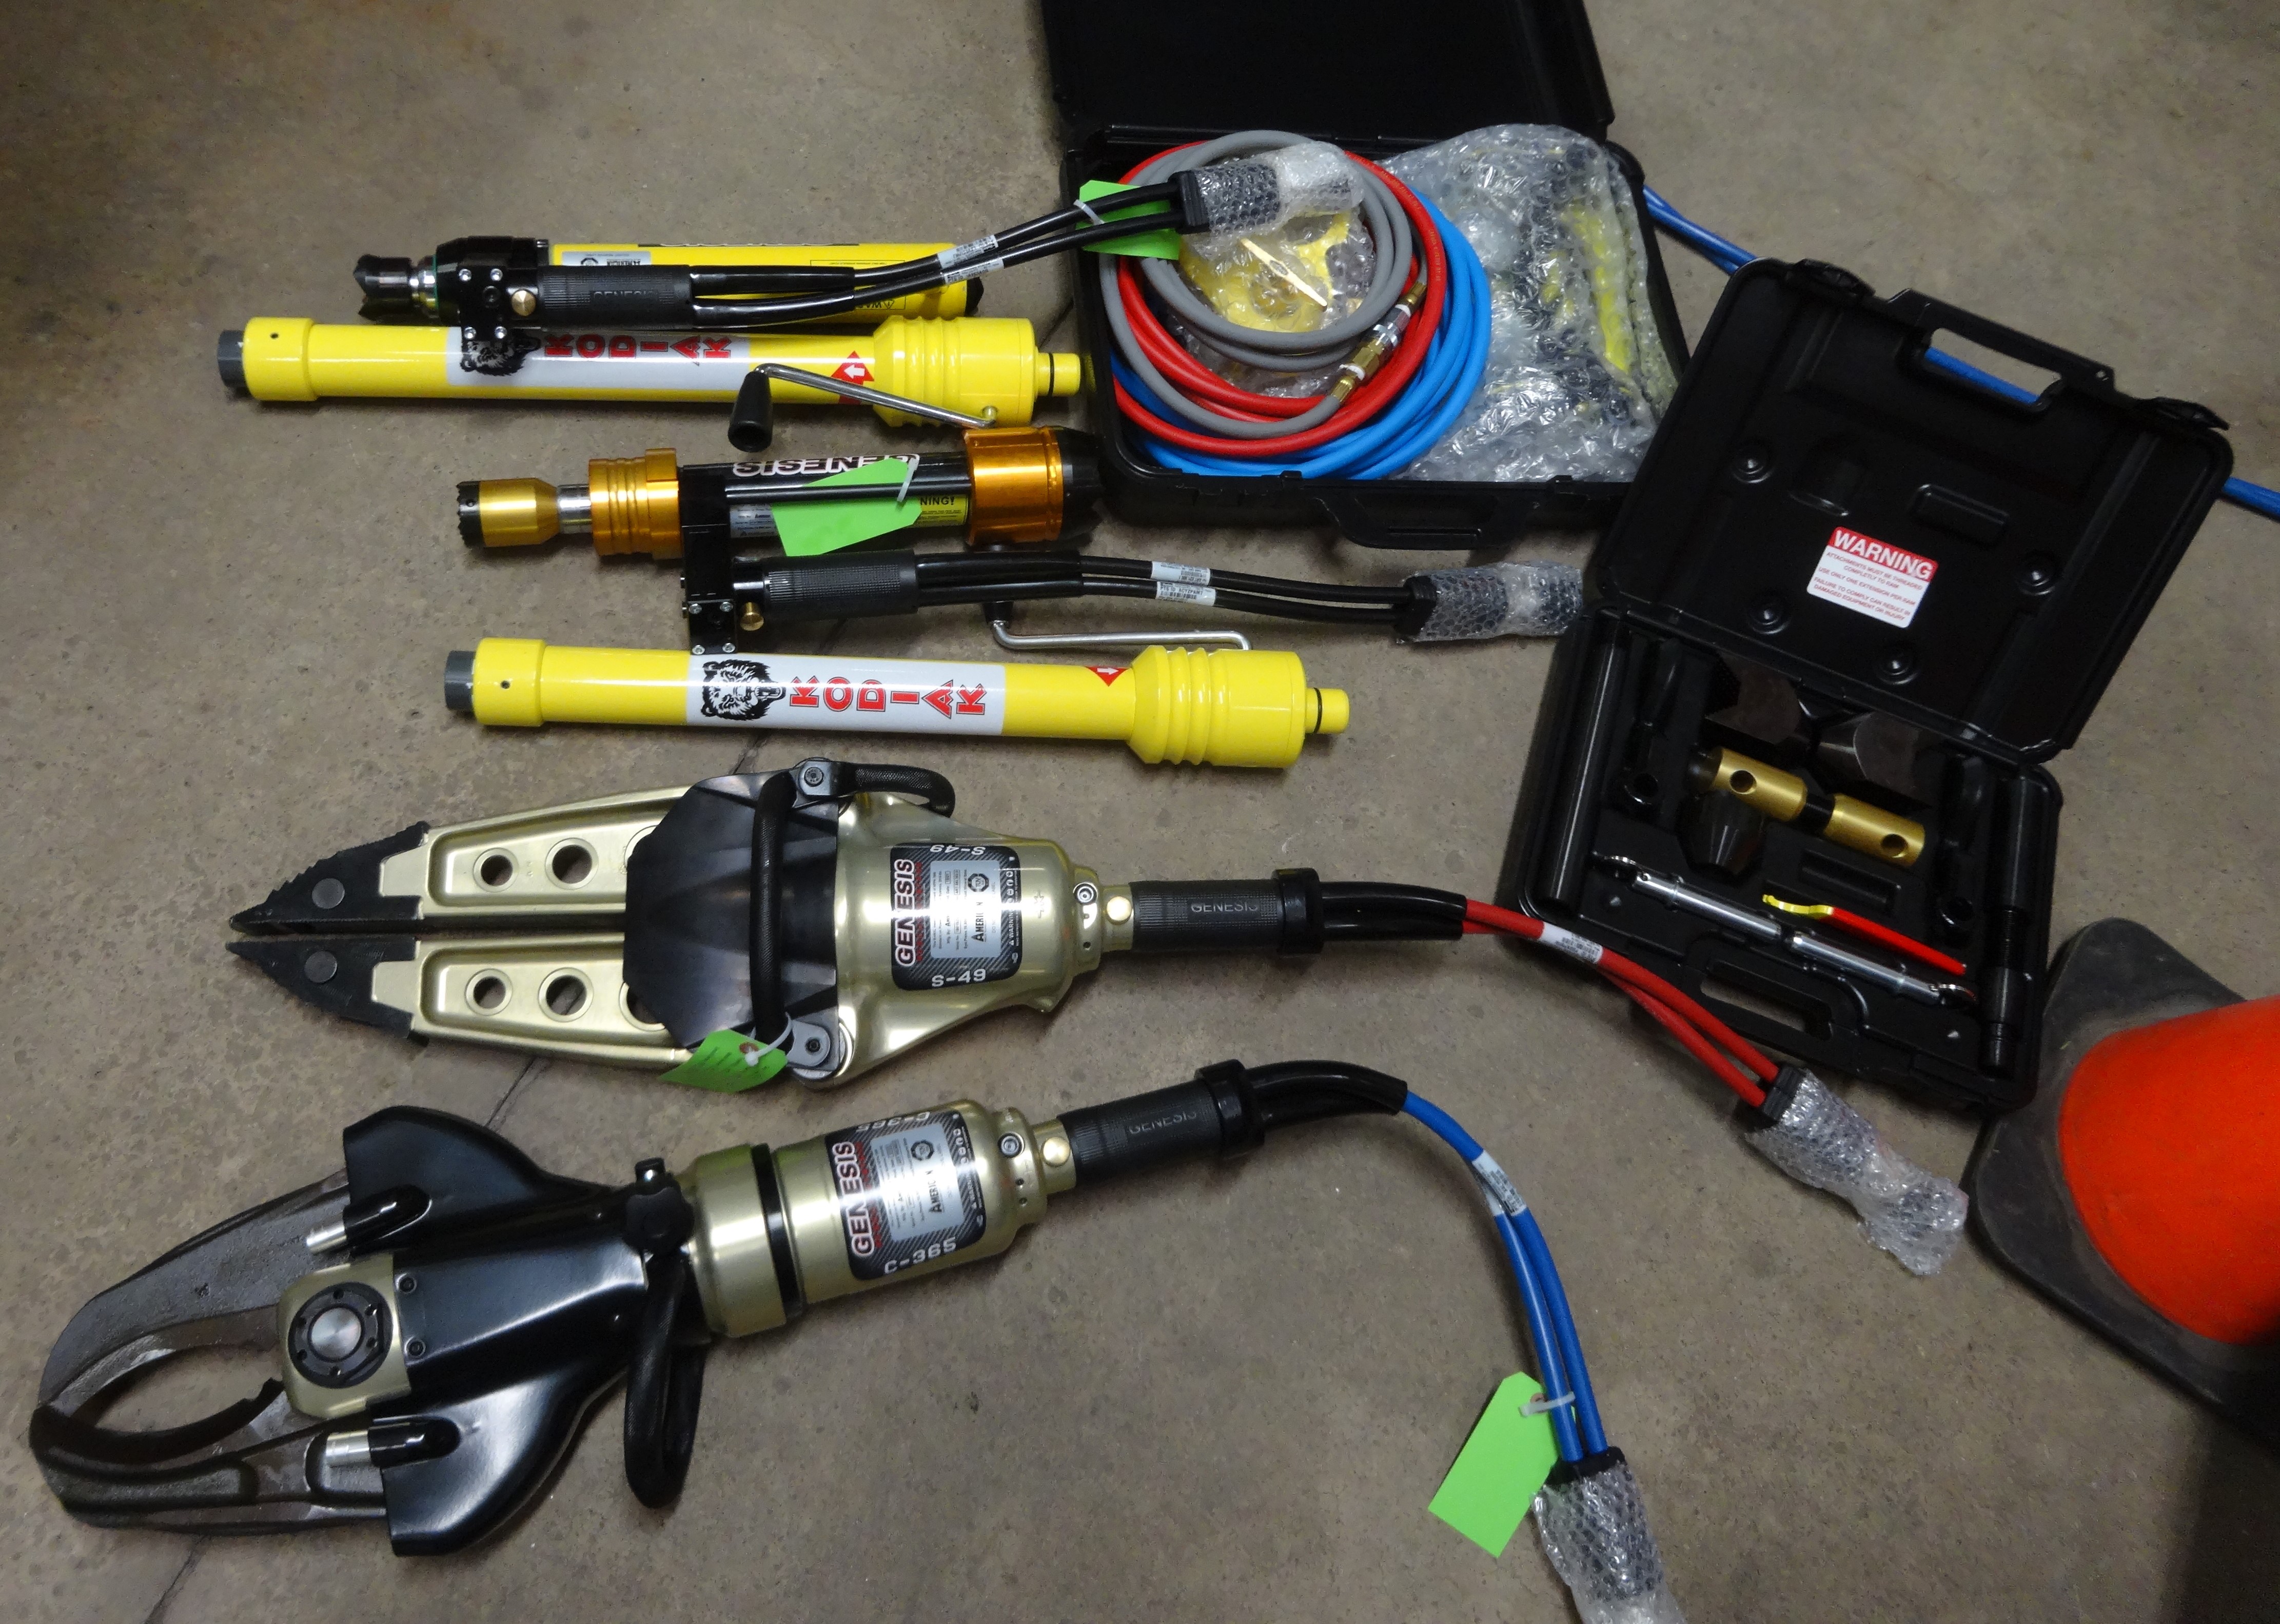 Brookfield Township Fire Department recently took possession of these new rescues tools. Howell Rescue Systems installed new hydraulic hose and accessories on the rescue truck to give power to the spreading and cutting tools.